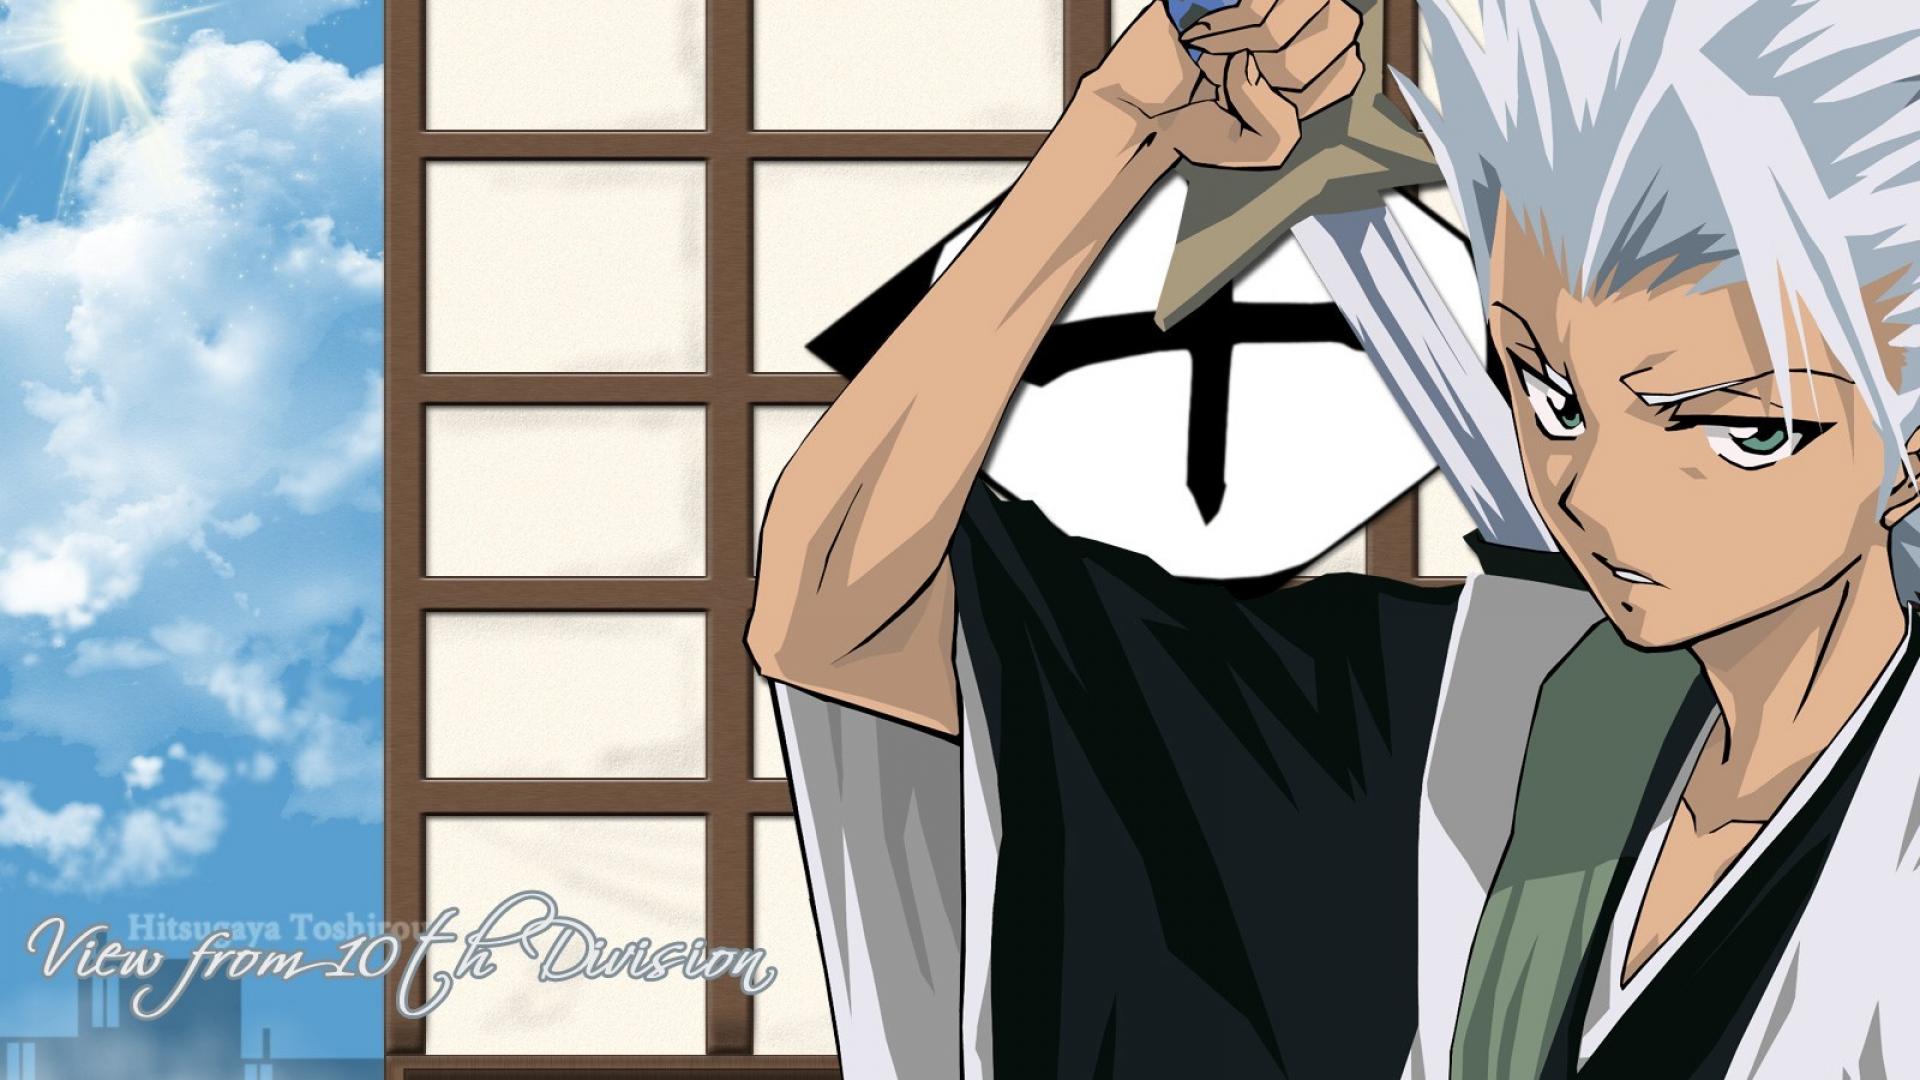 Toshiro Captain Of Squad 10 - Bleach & Anime Background Wallpapers On F...